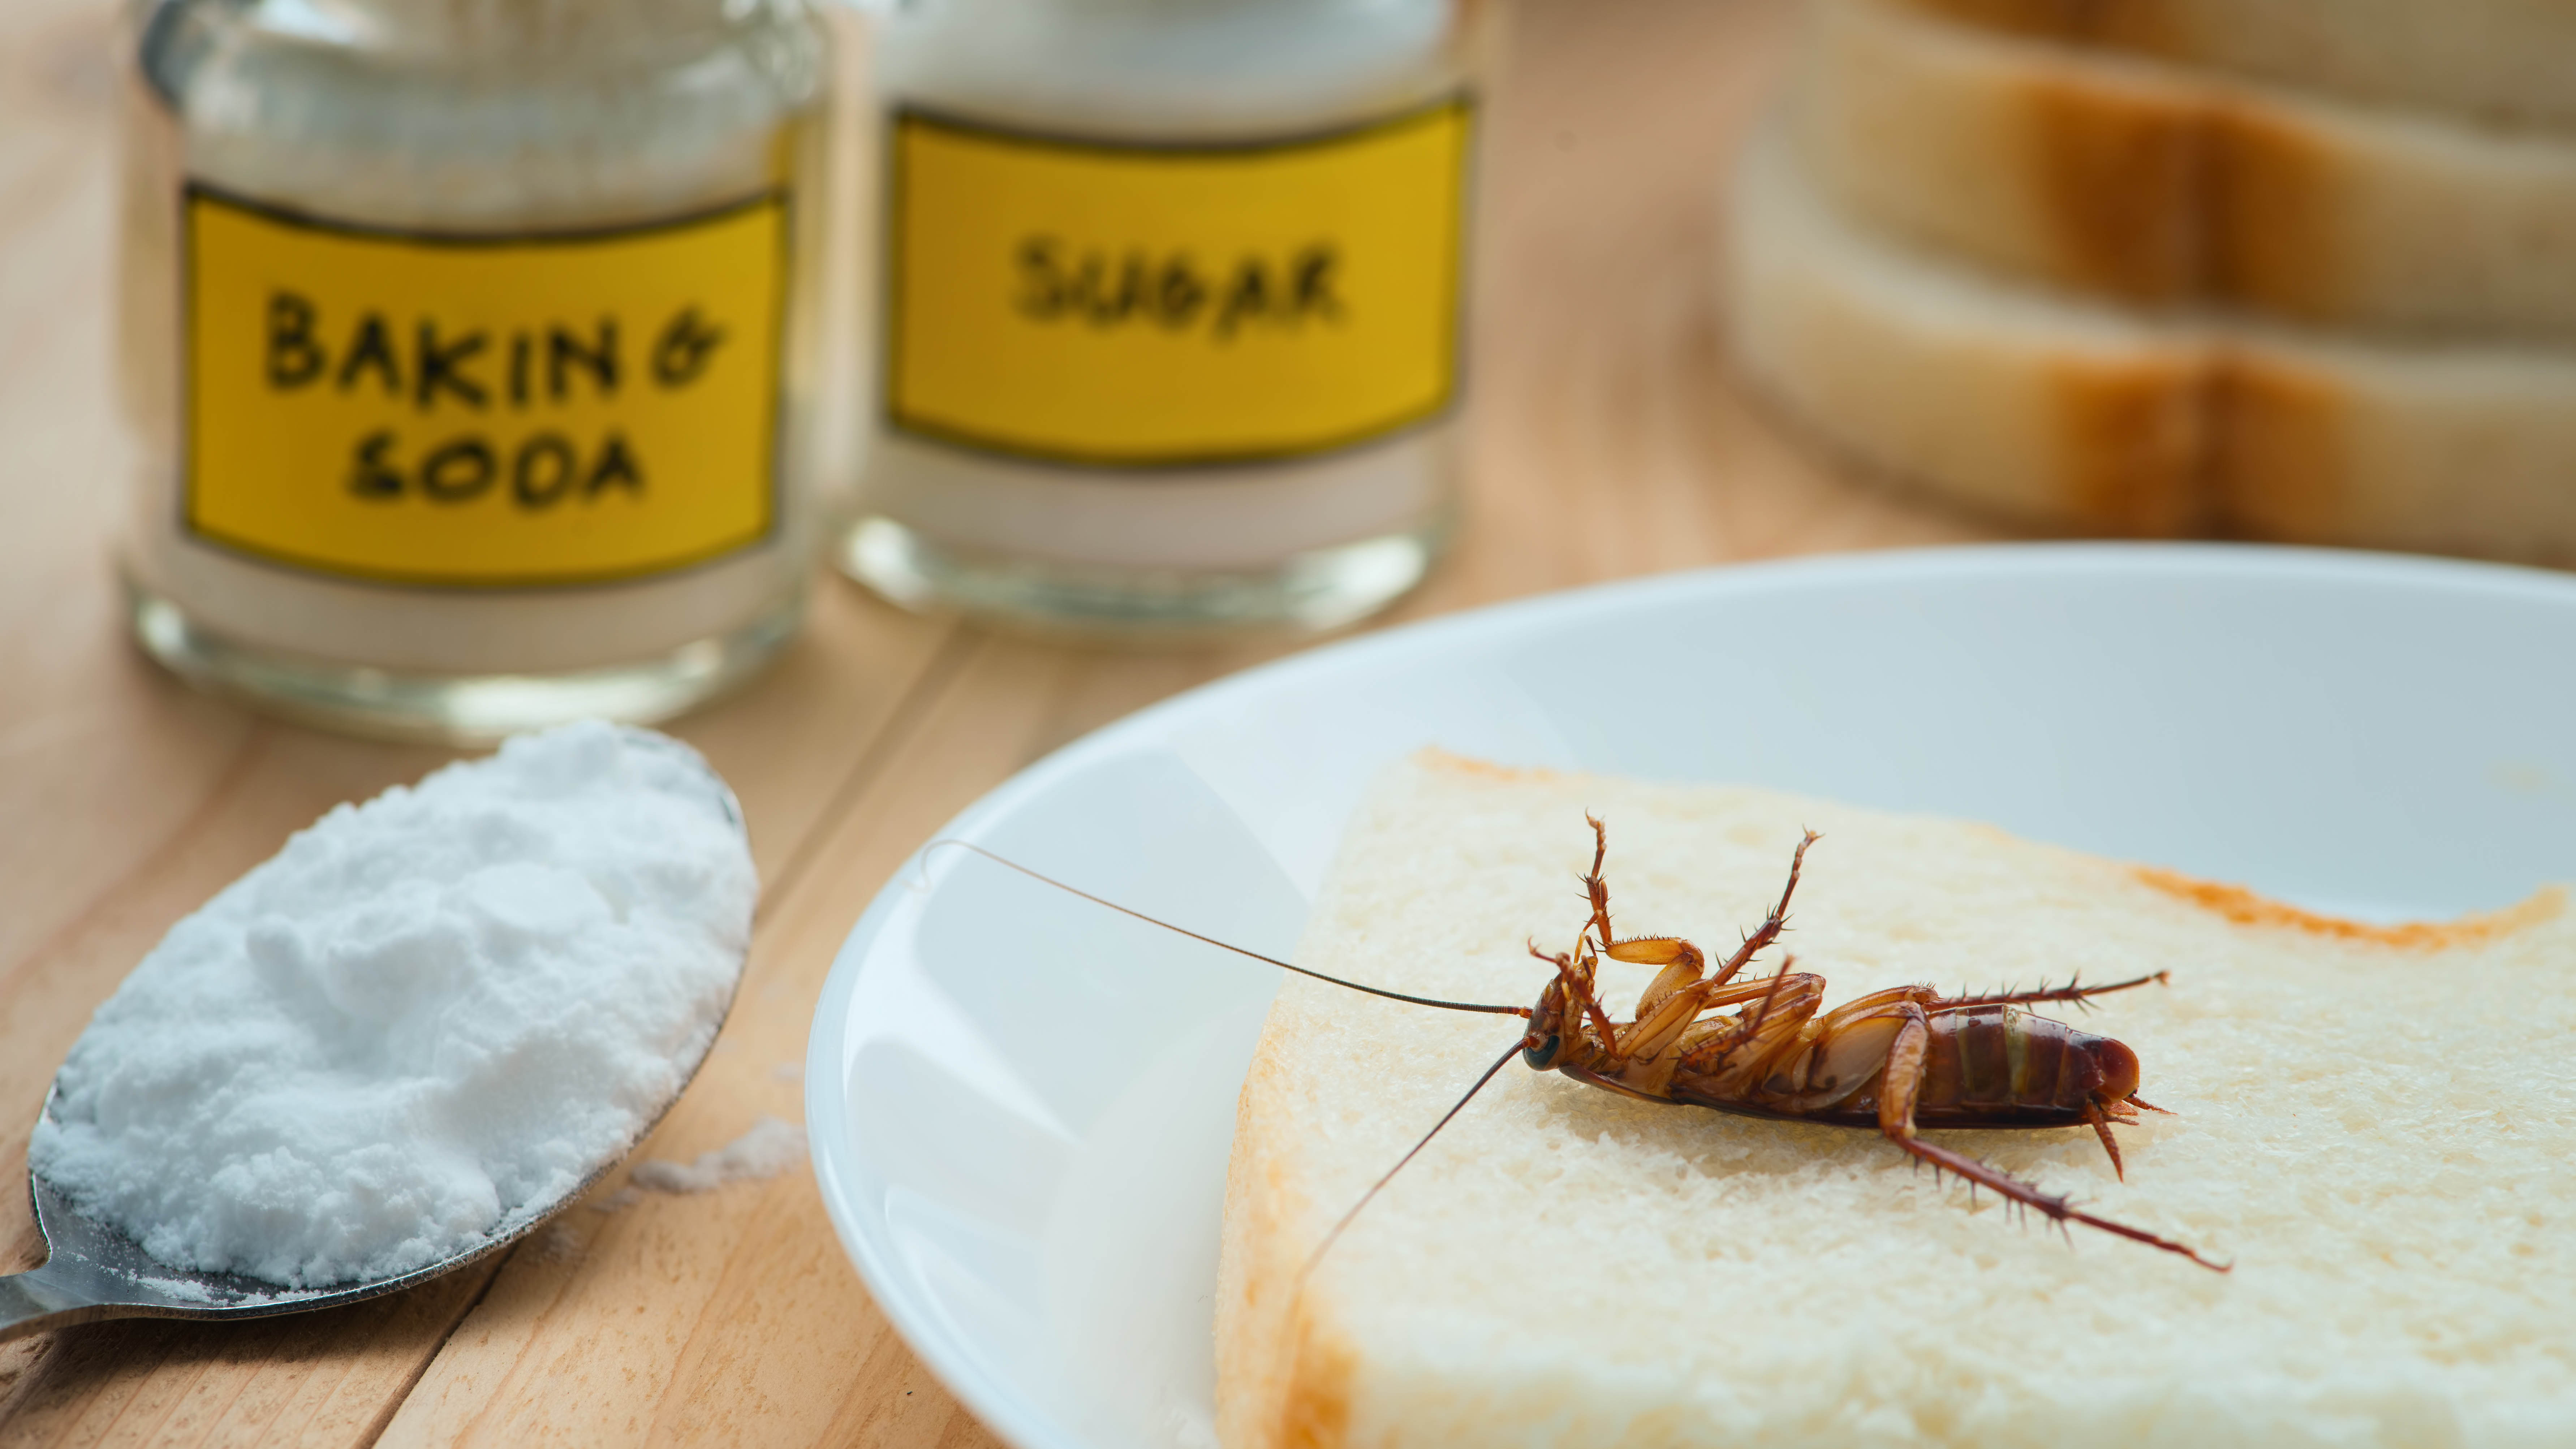 A cockroach died on a piece of bread after eating baking soda